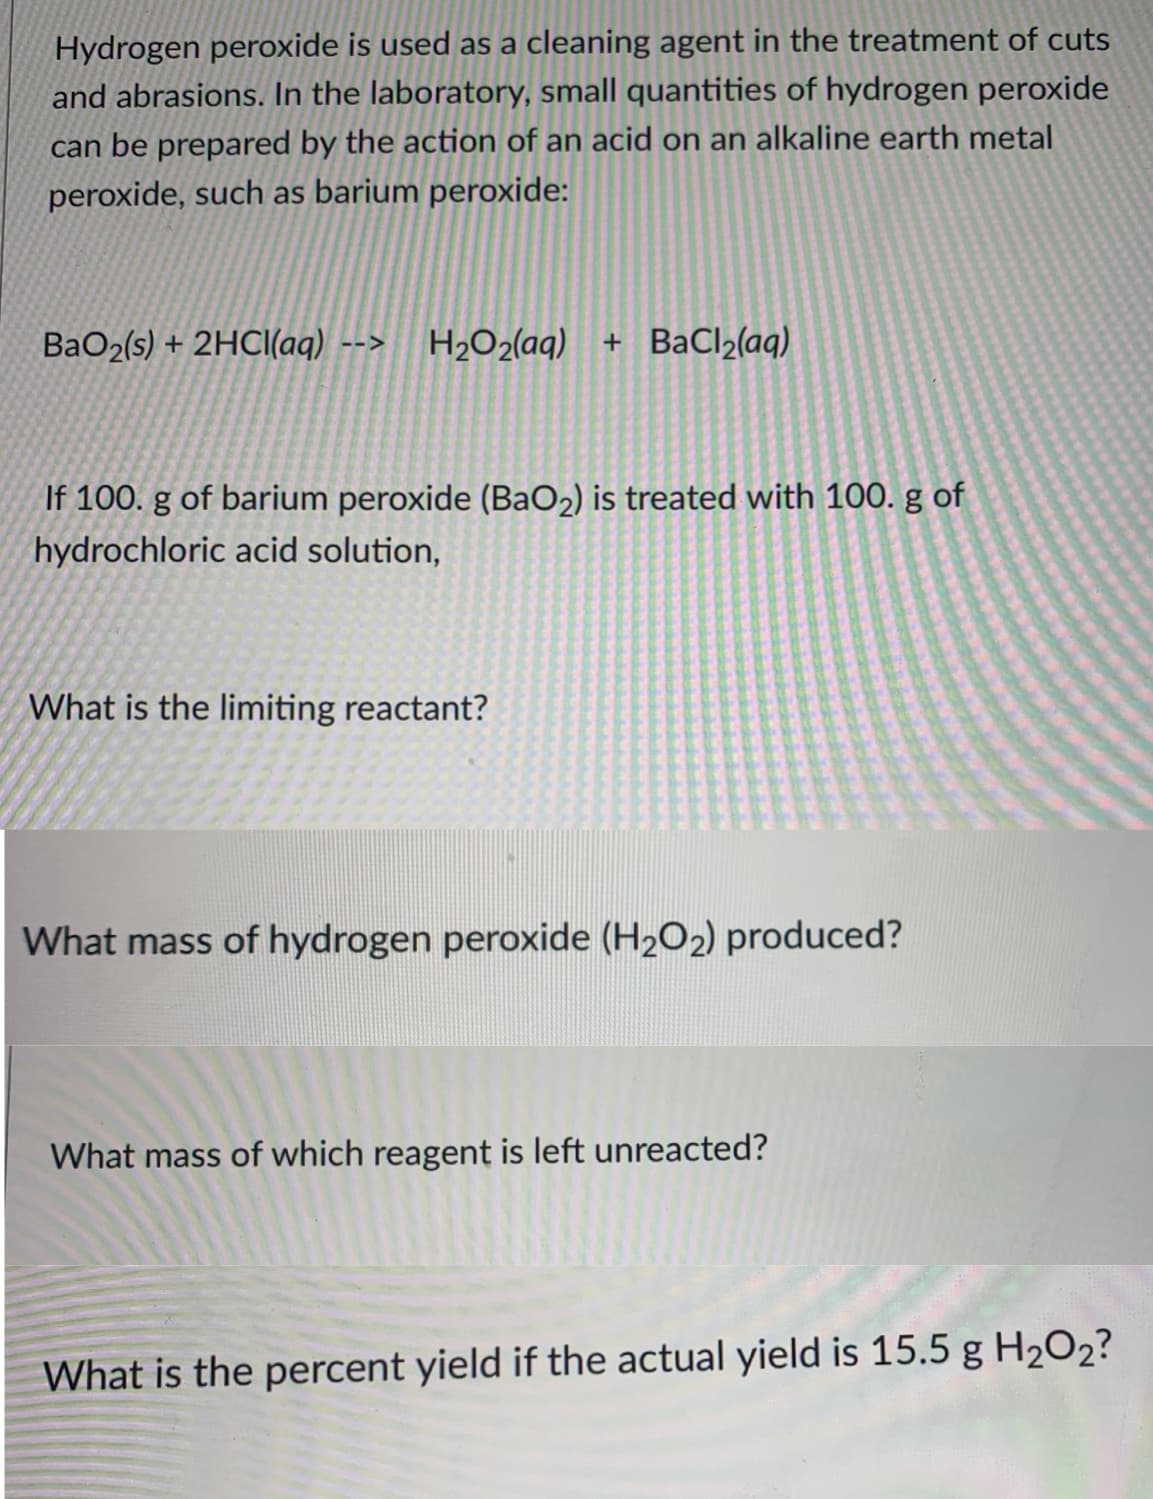 Hydrogen peroxide is used as a cleaning agent in the treatment of cuts
and abrasions. In the laboratory, small quantities of hydrogen peroxide
can be prepared by the action of an acid on an alkaline earth metal
peroxide, such as barium peroxide:
BaO2(s) + 2HCI(aq) --> H2O2(aq) + BaCl2(aq)
If 100. g of barium peroxide (BaO2) is treated with 100. g of
hydrochloric acid solution,
What is the limiting reactant?
What mass of hydrogen peroxide (H2O2) produced?
What mass of which reagent is left unreacted?
What is the percent yield if the actual yield is 15.5 g H2O2?
